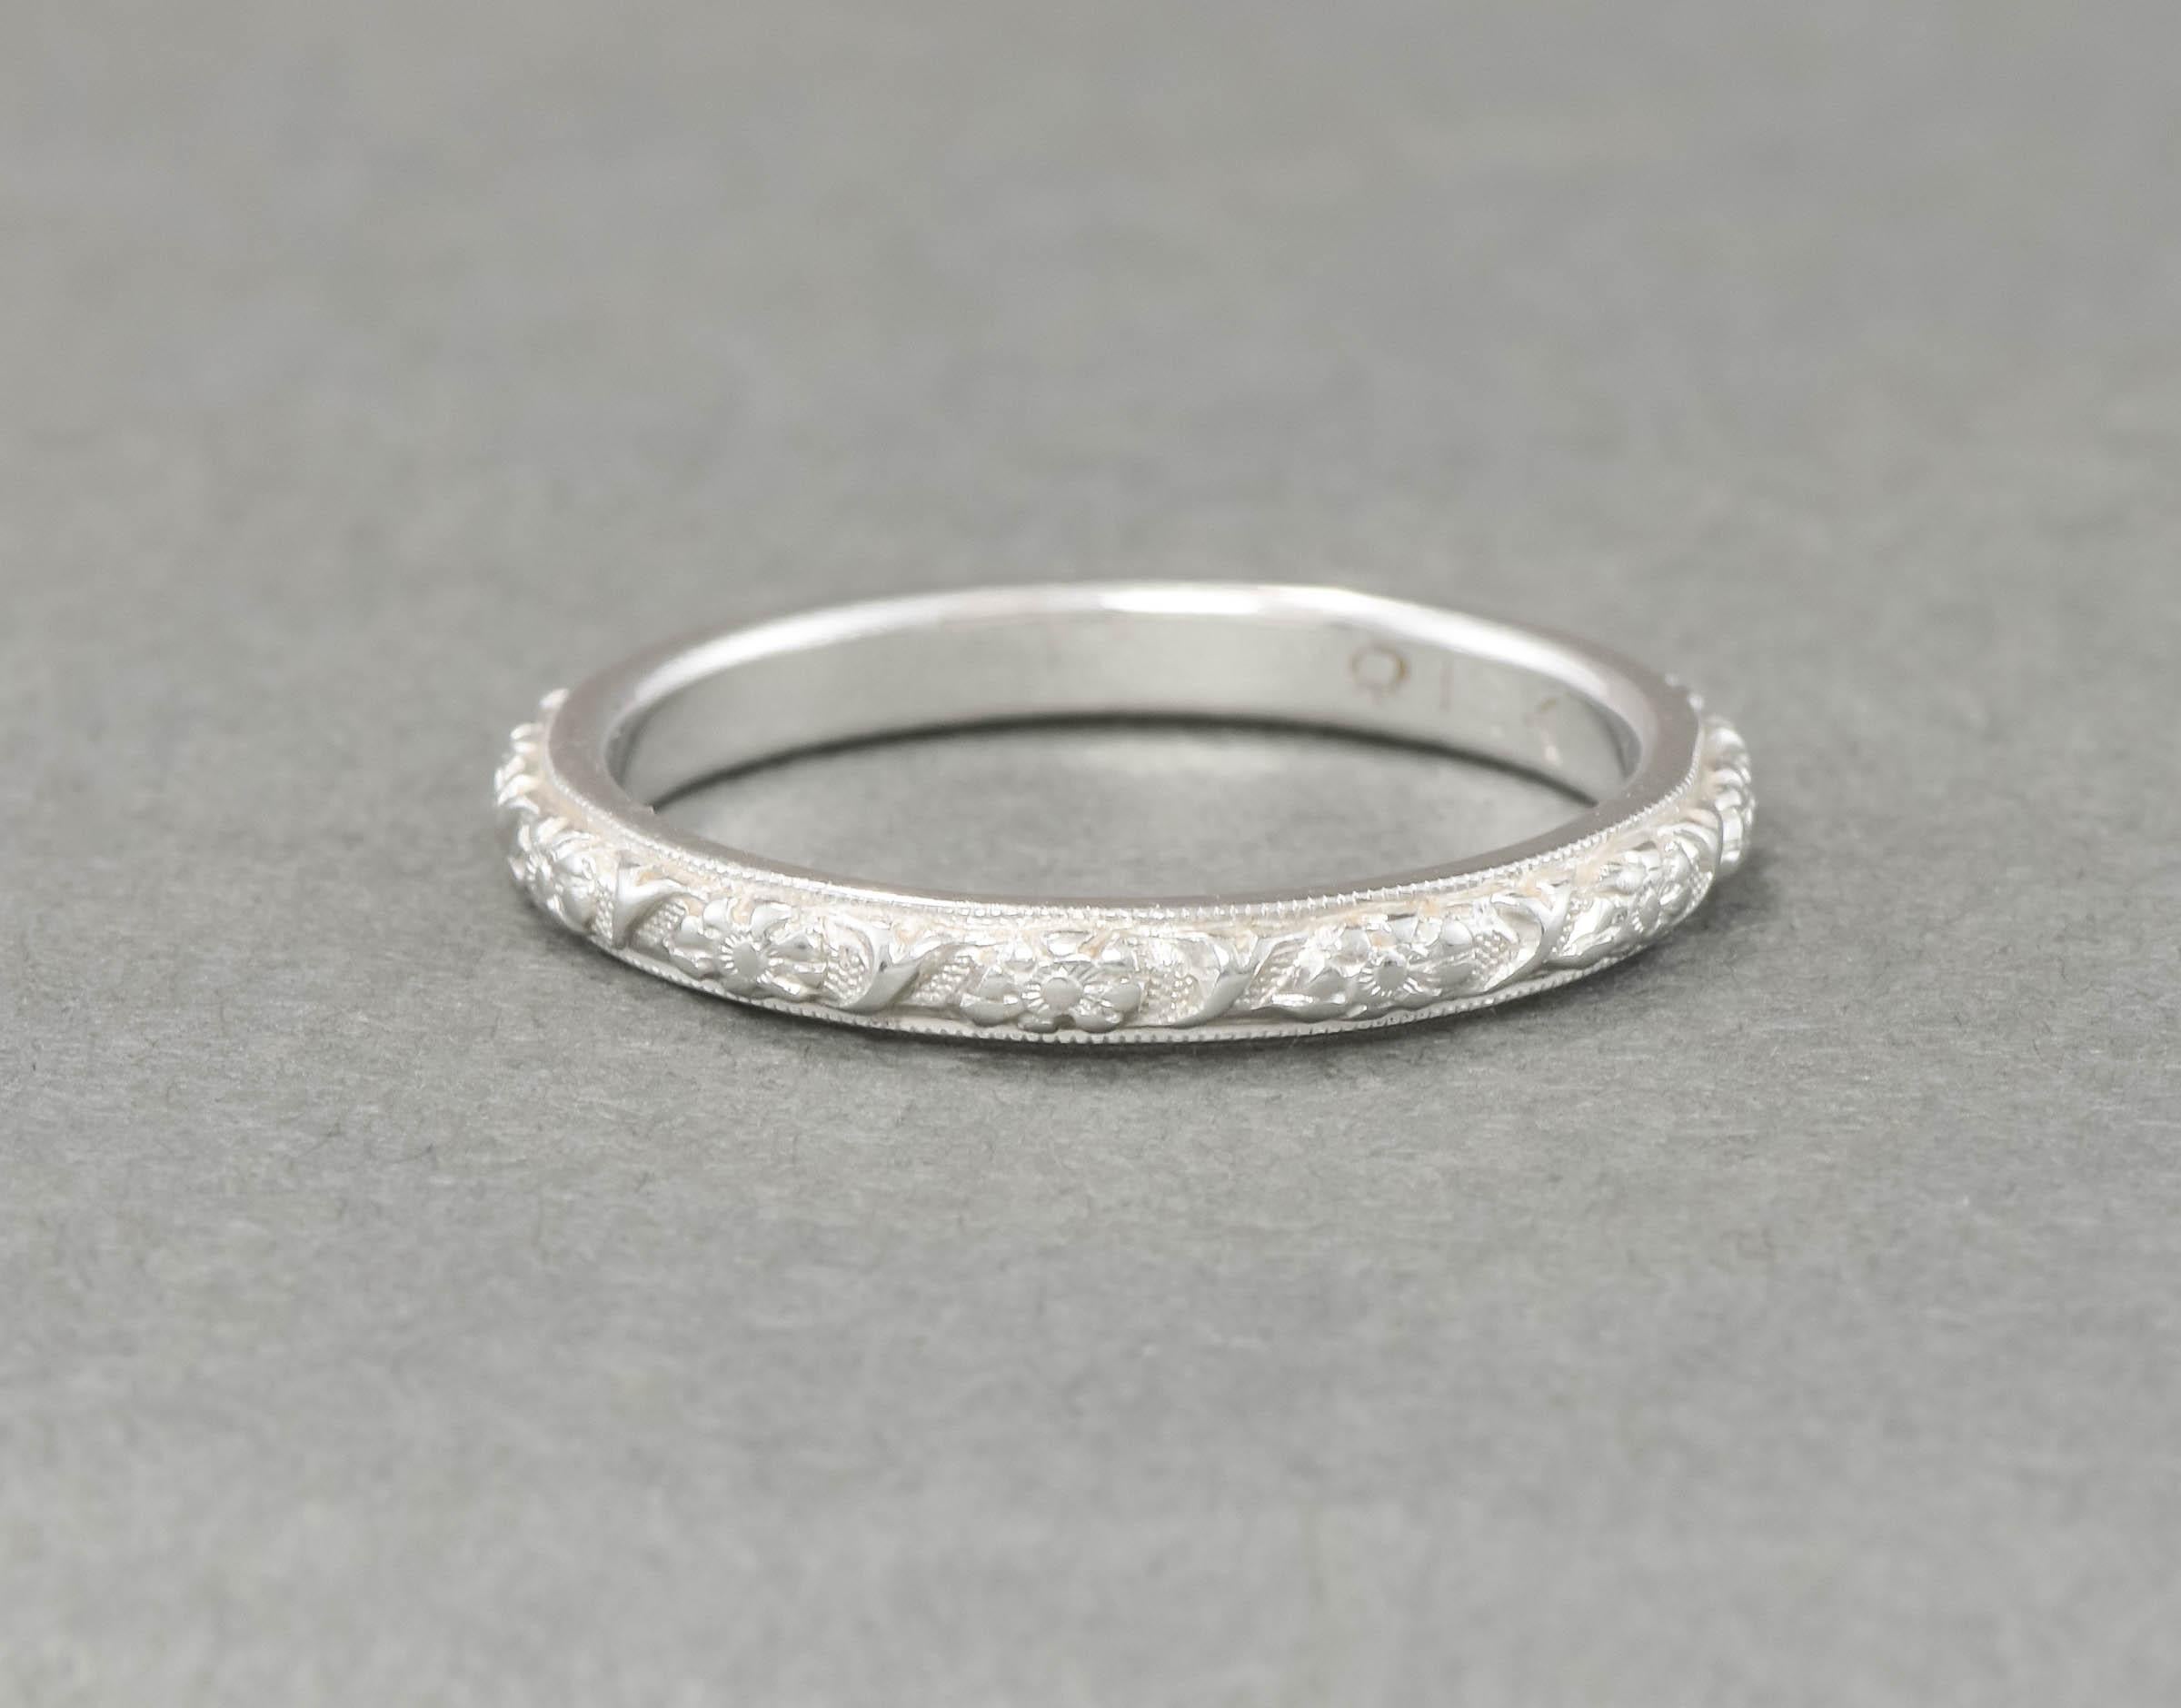 It's so hard to find Art Deco era wedding bands in such amazing condition - especially those that have the wonderful carved floral designs so coveted from this period.

Measuring approximately 2.3 mm in width, with a rise/thickness of approximately